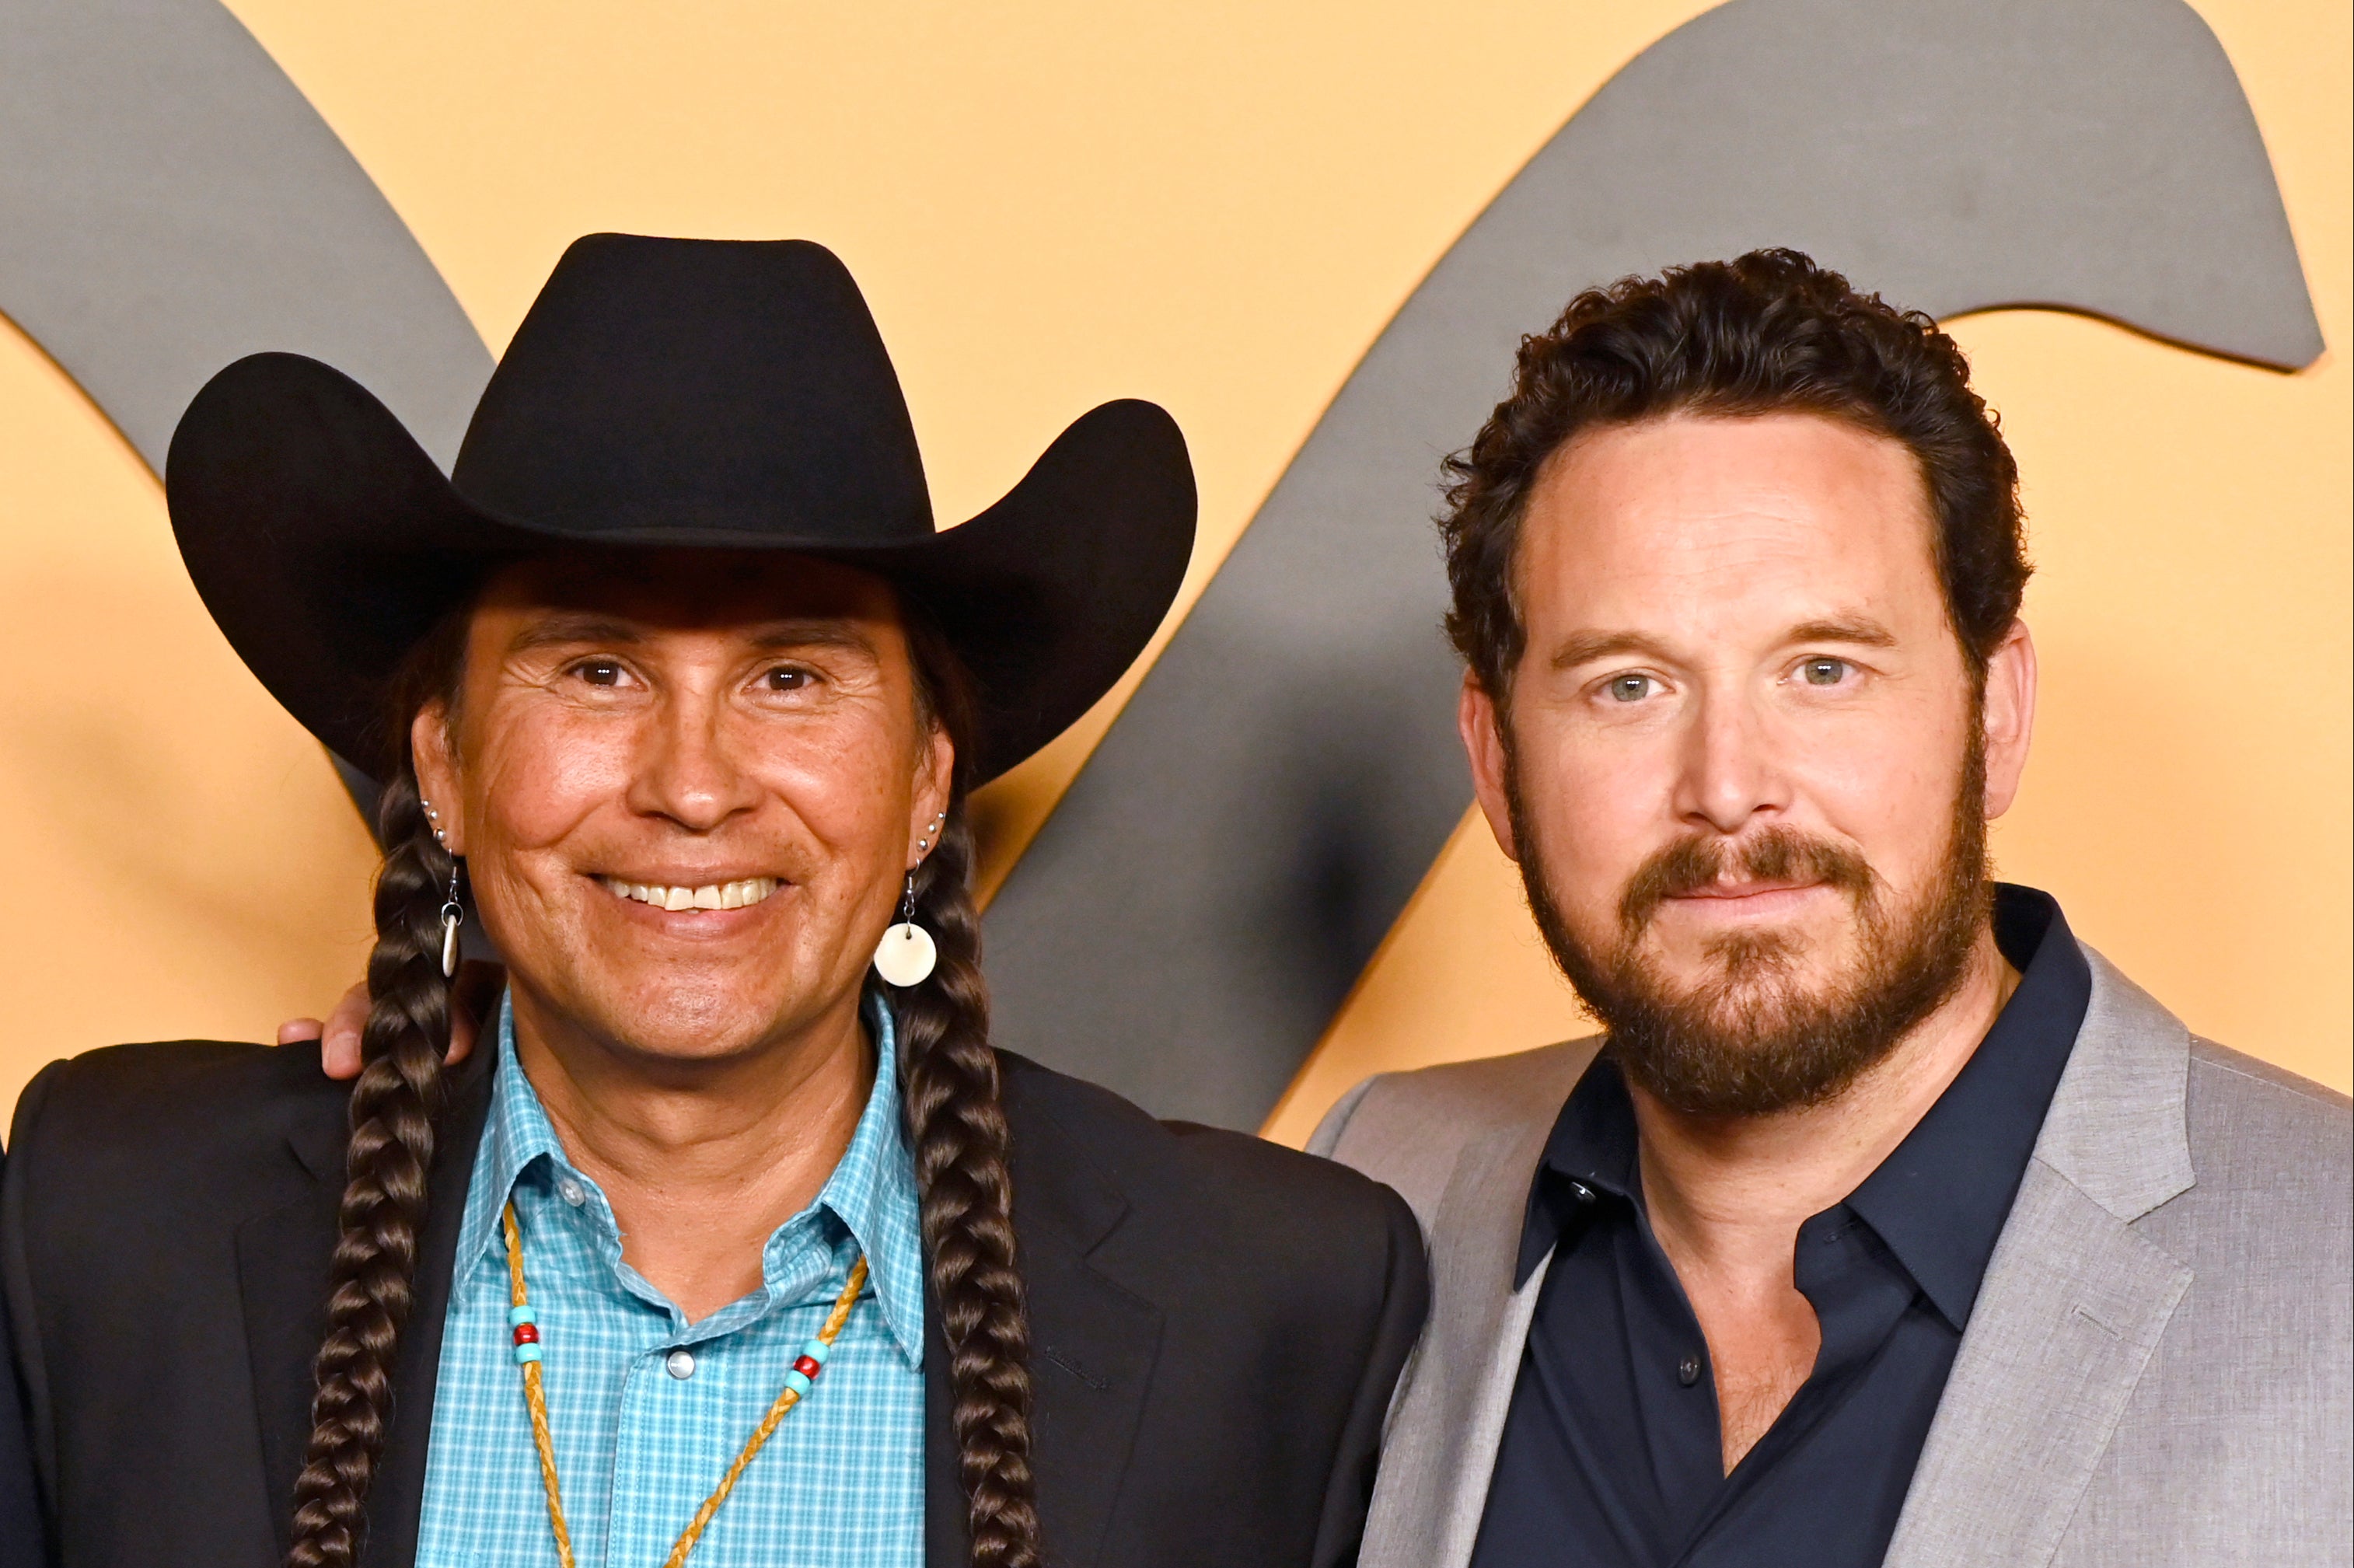 ‘Yellowstone’ stars Mo Brings Plenty and Cole Hauser in 2019